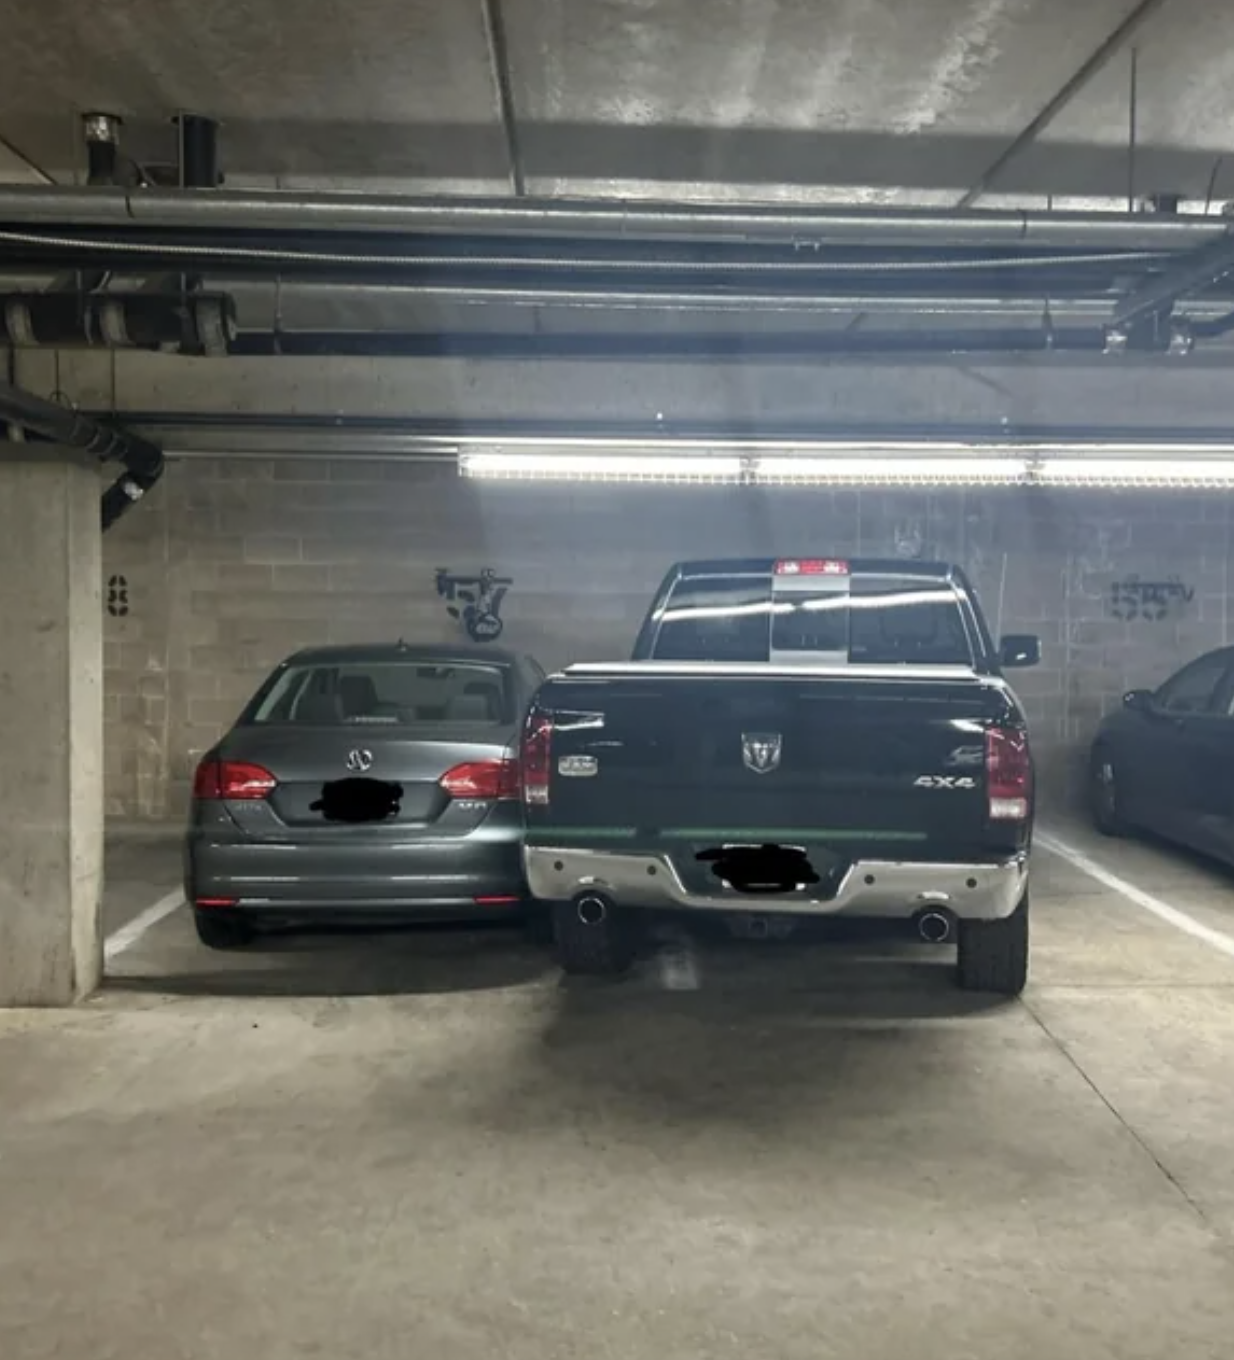 truck blocking in a car that is within the parking spot lines